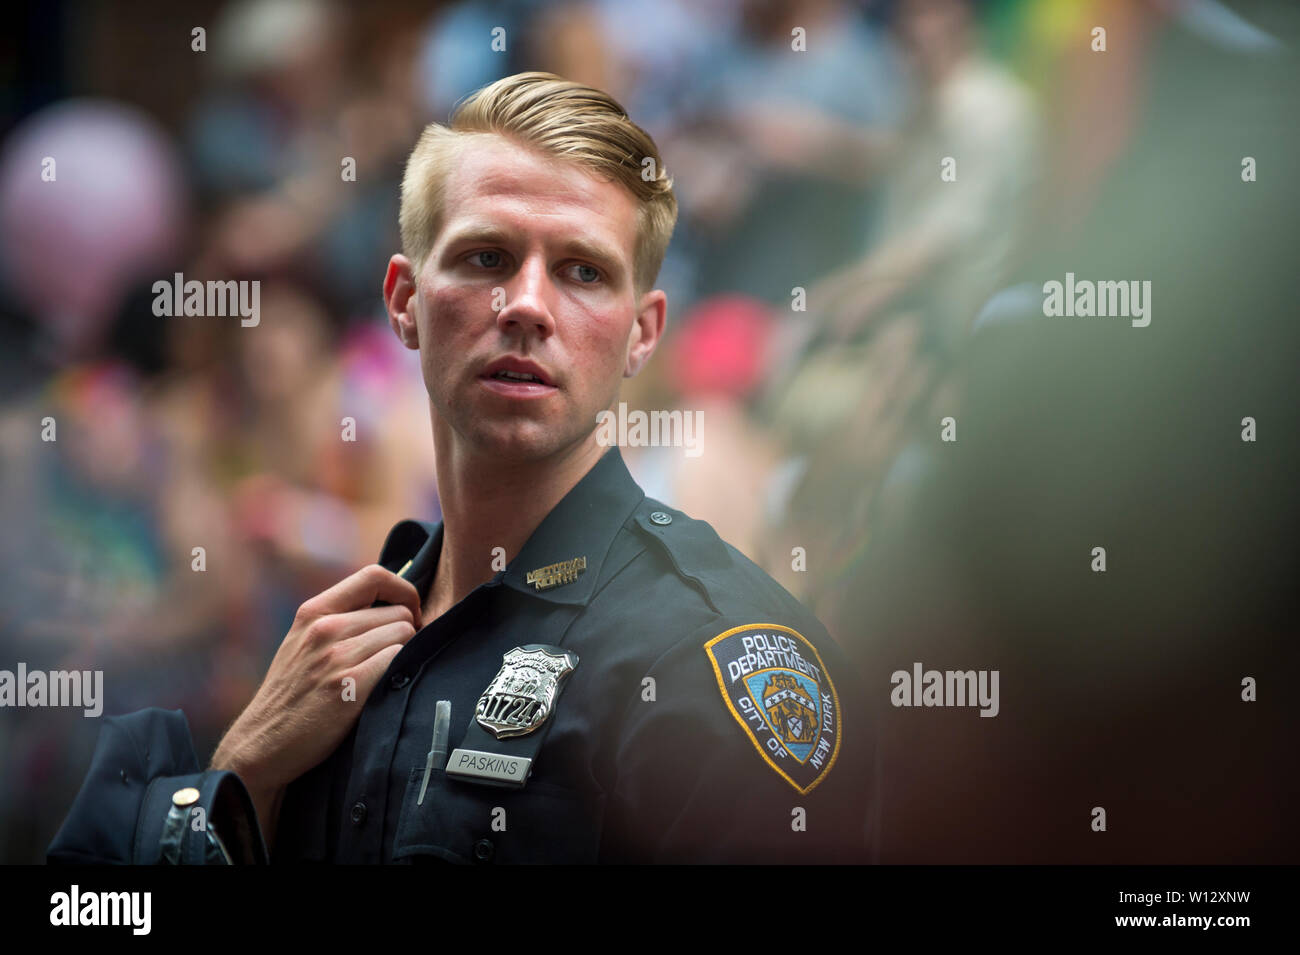 NEW YORK CITY - JUNE 25, 2017: A handsome young NYPD Police officer provides security on the sidelines of the annual Pride Parade in the Village. Stock Photo